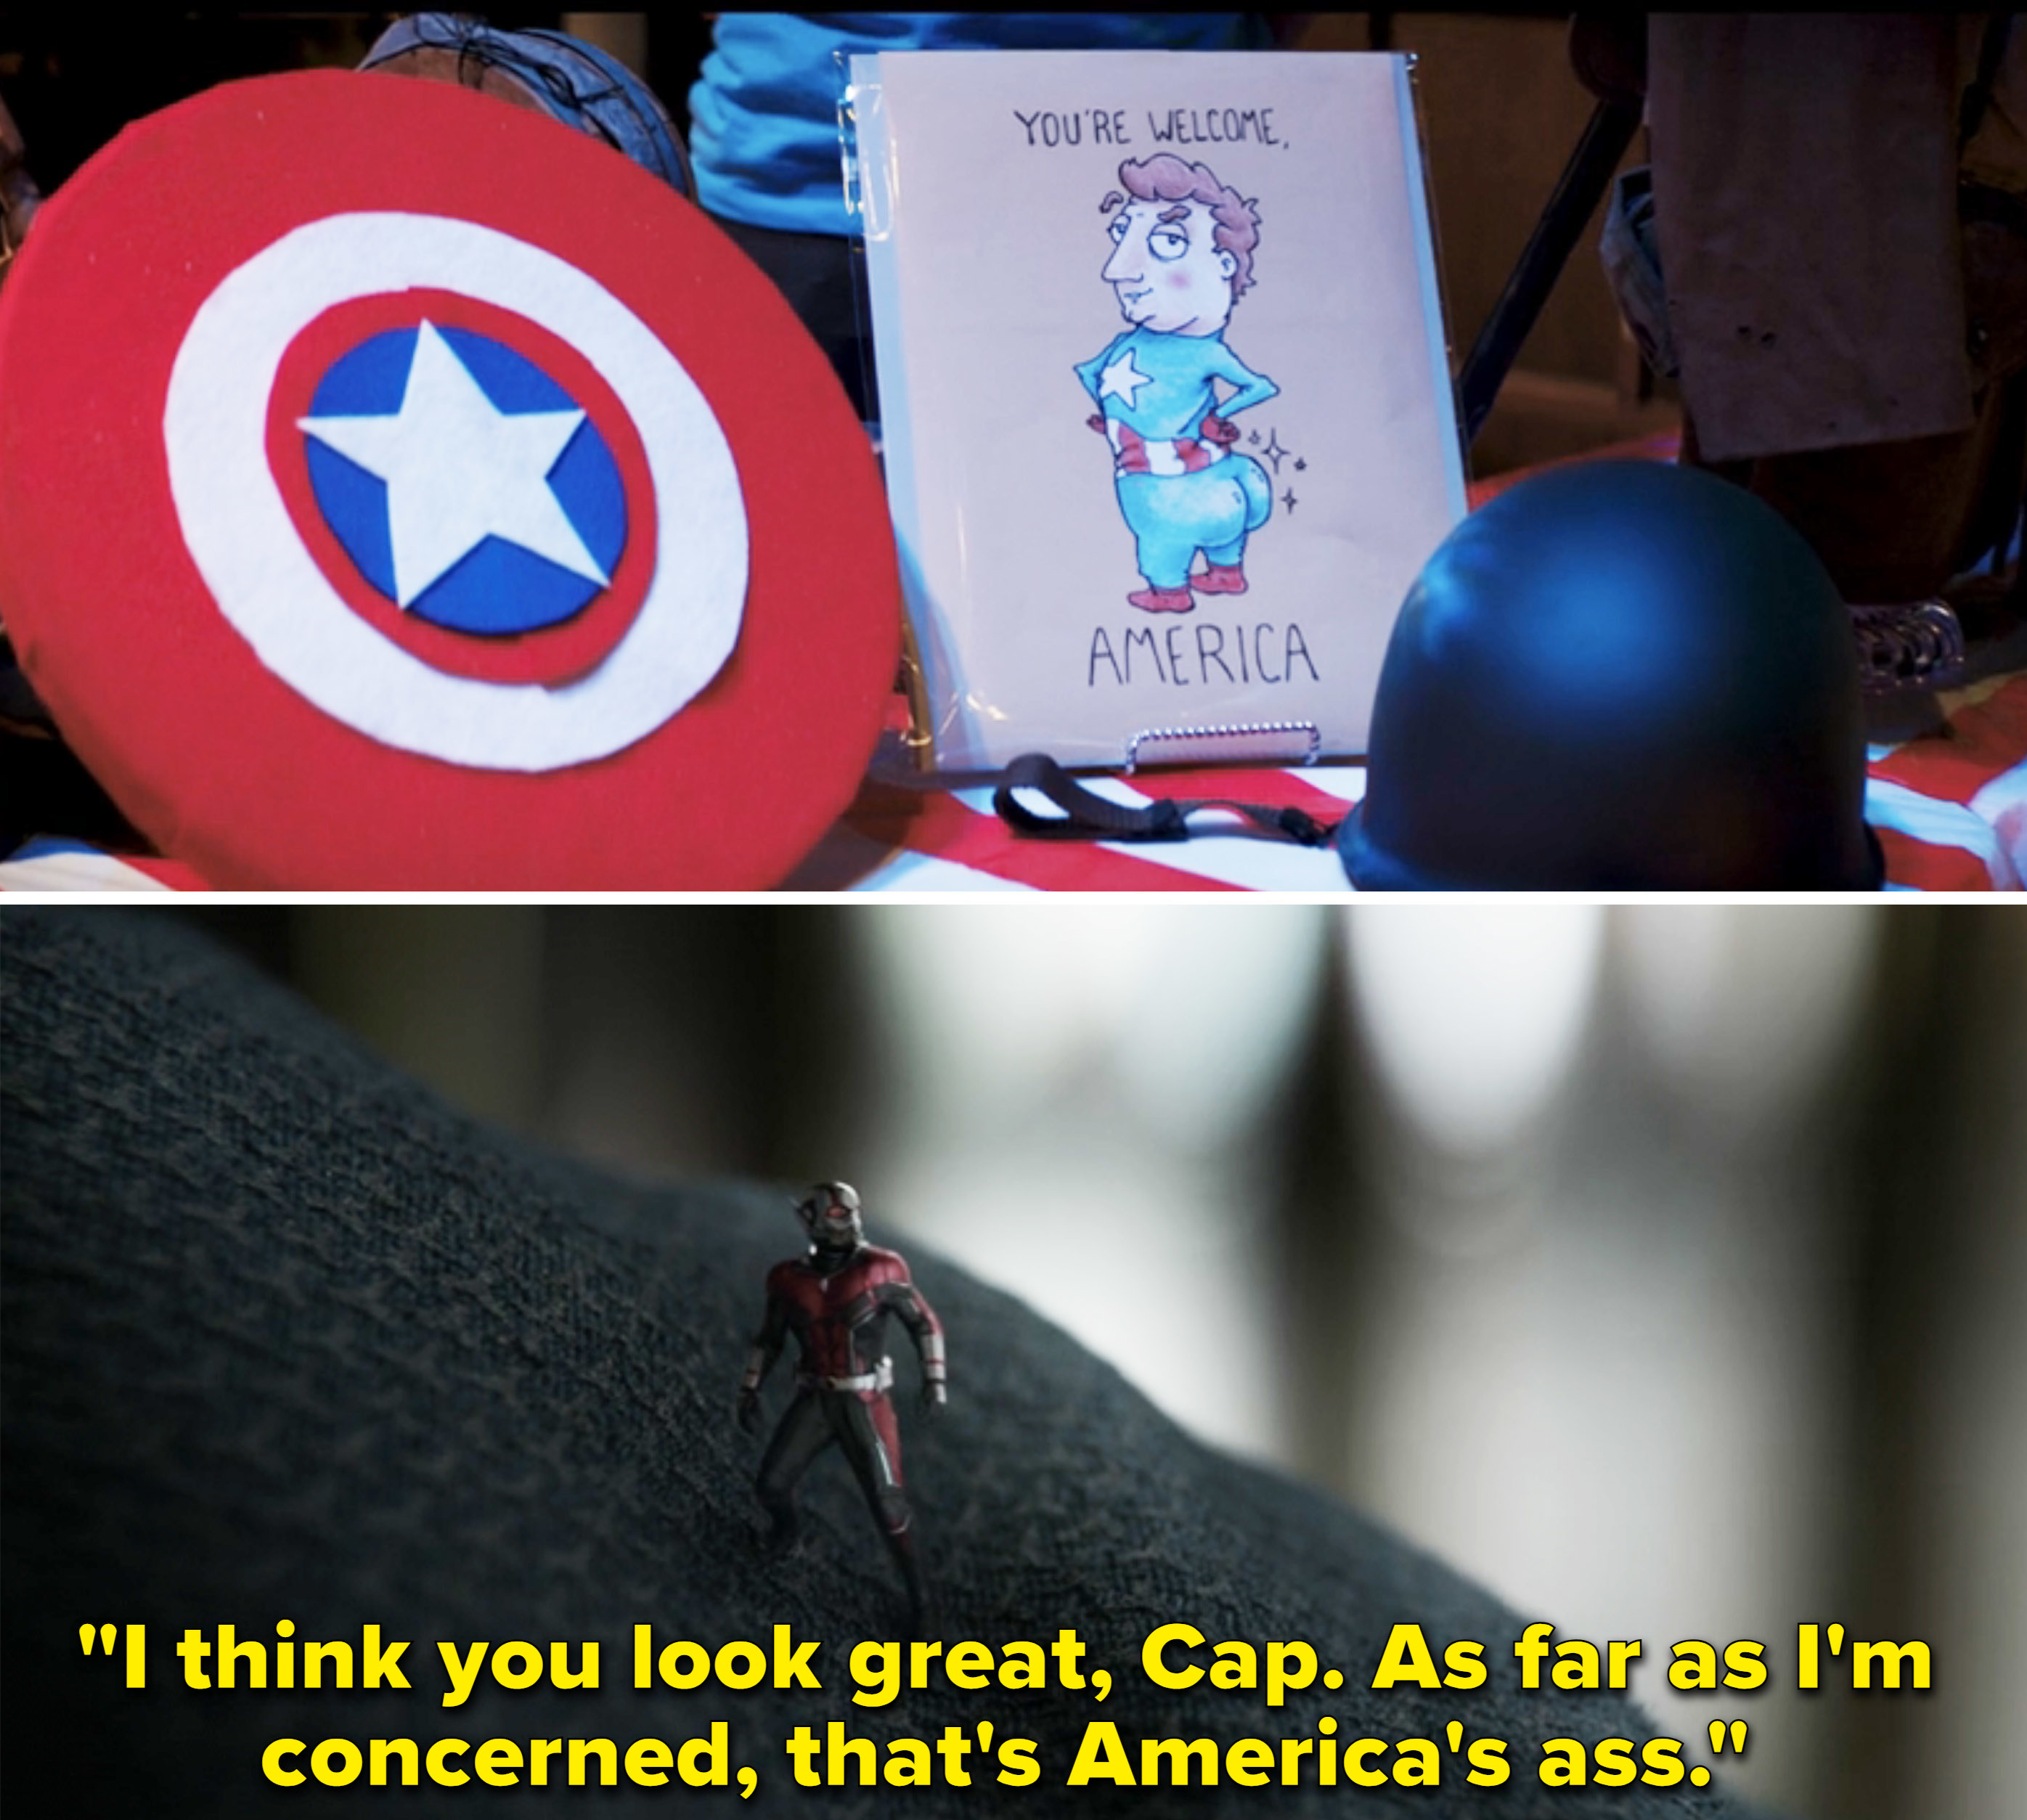 A cartoon Captain America has a comically oversized butt, and the text around him says &quot;You&#x27;re welcome America&quot;